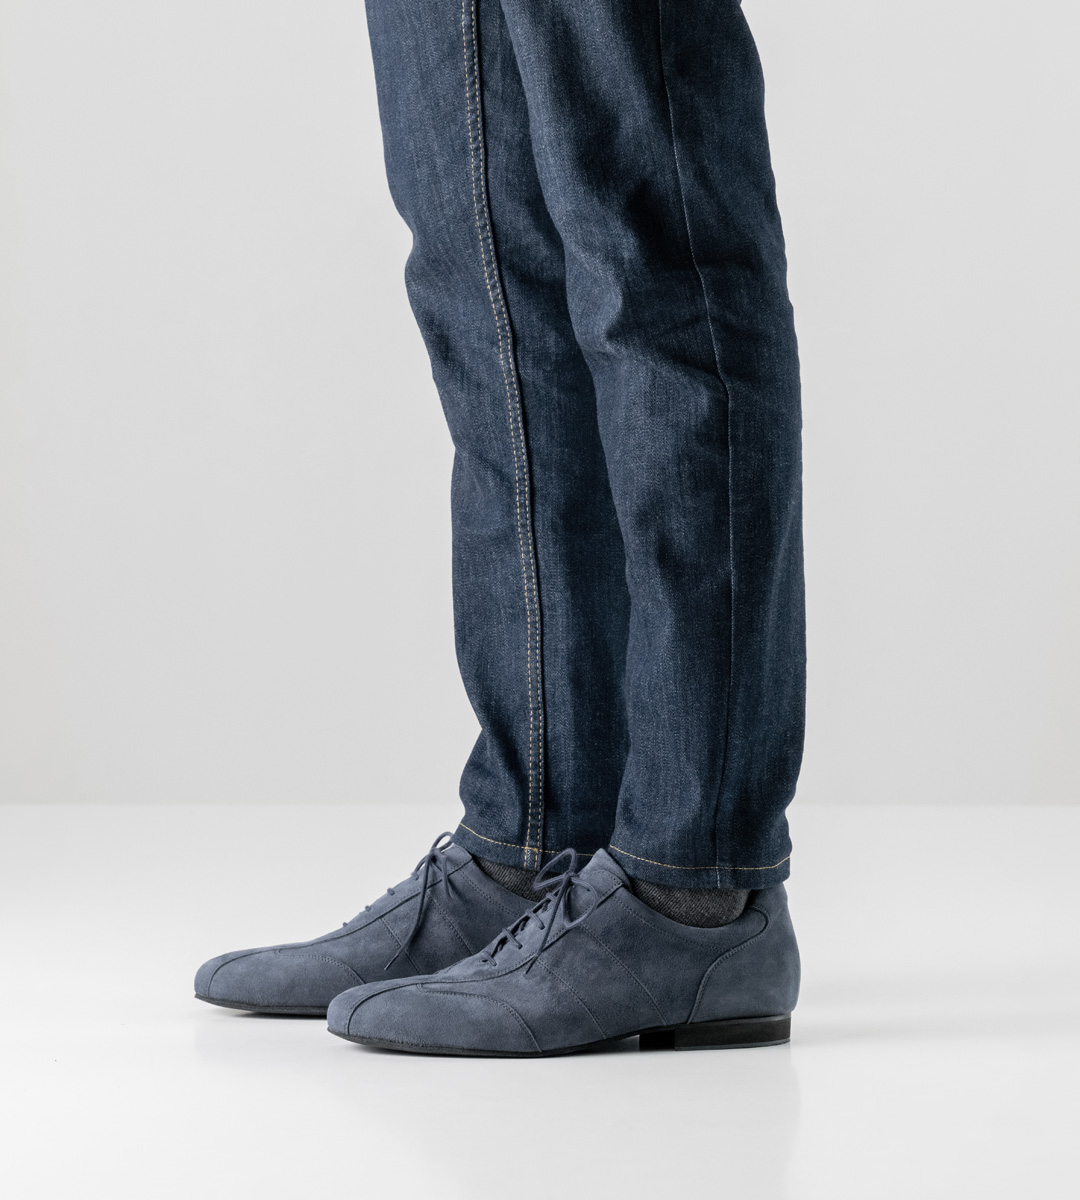 Blue jeans in combination with 1.5 cm high Werner Kern men's dance shoe